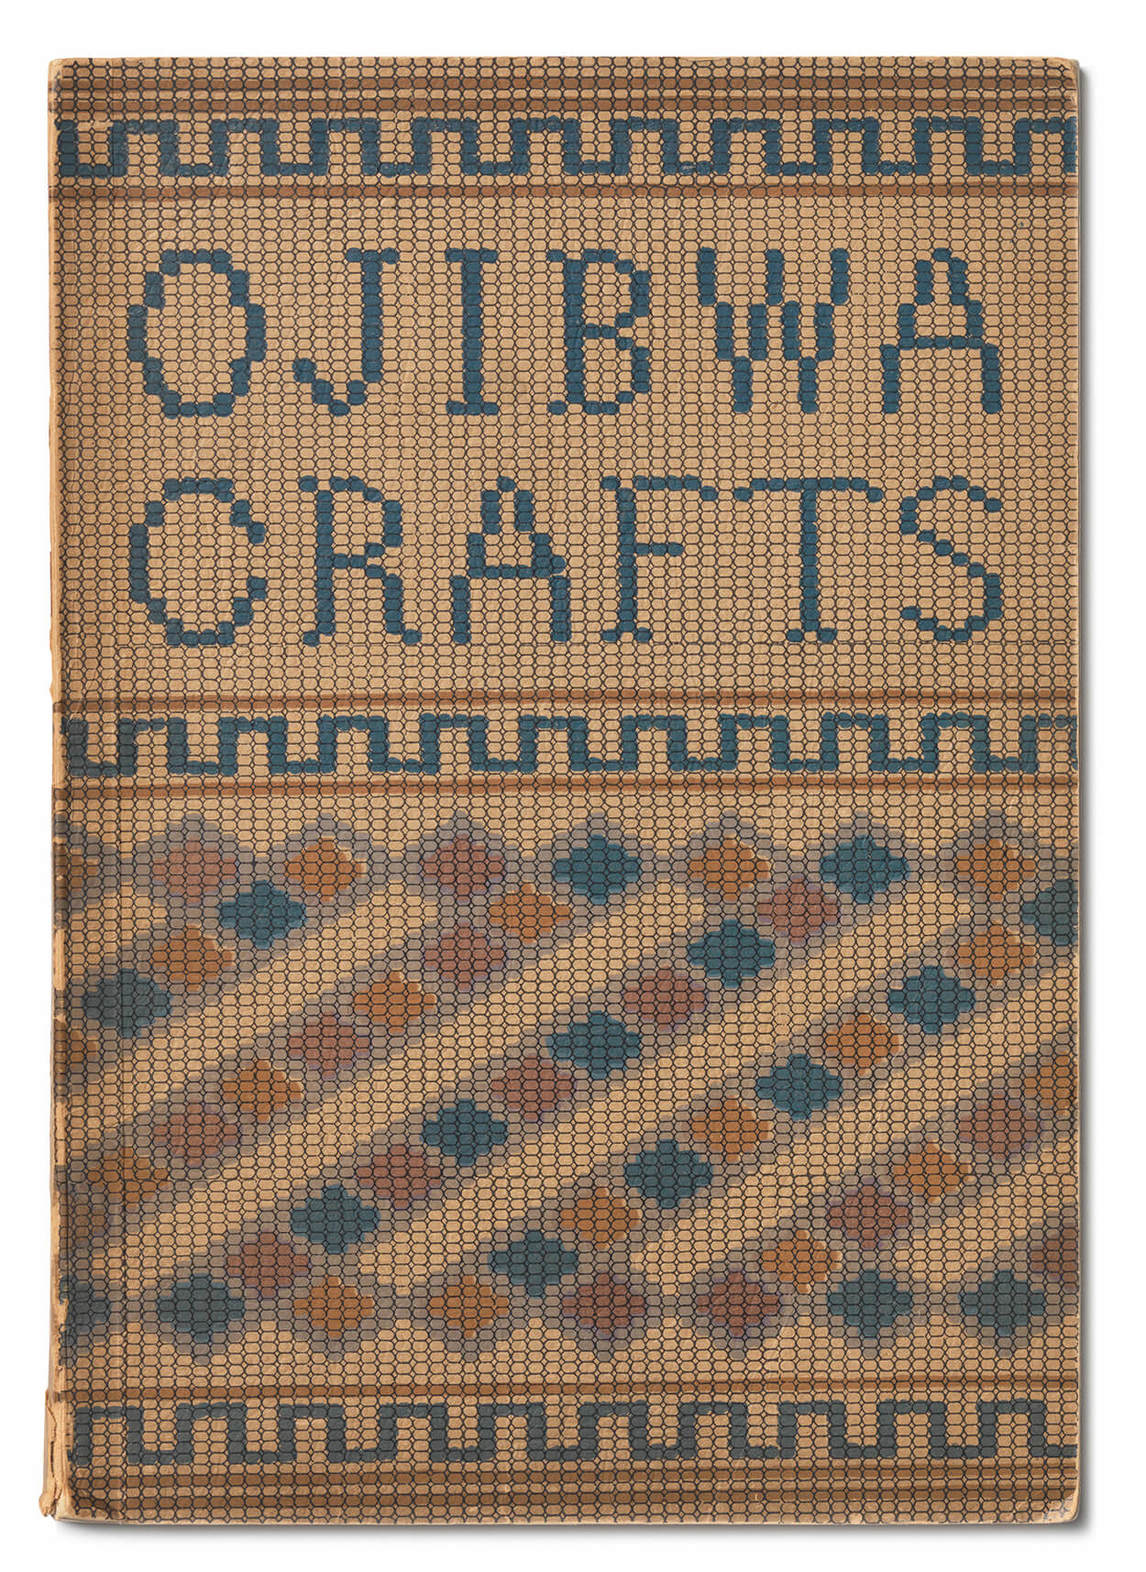 Cover of the 1943 edition of Ojibwa Crafts by Carrie A. Lyford,